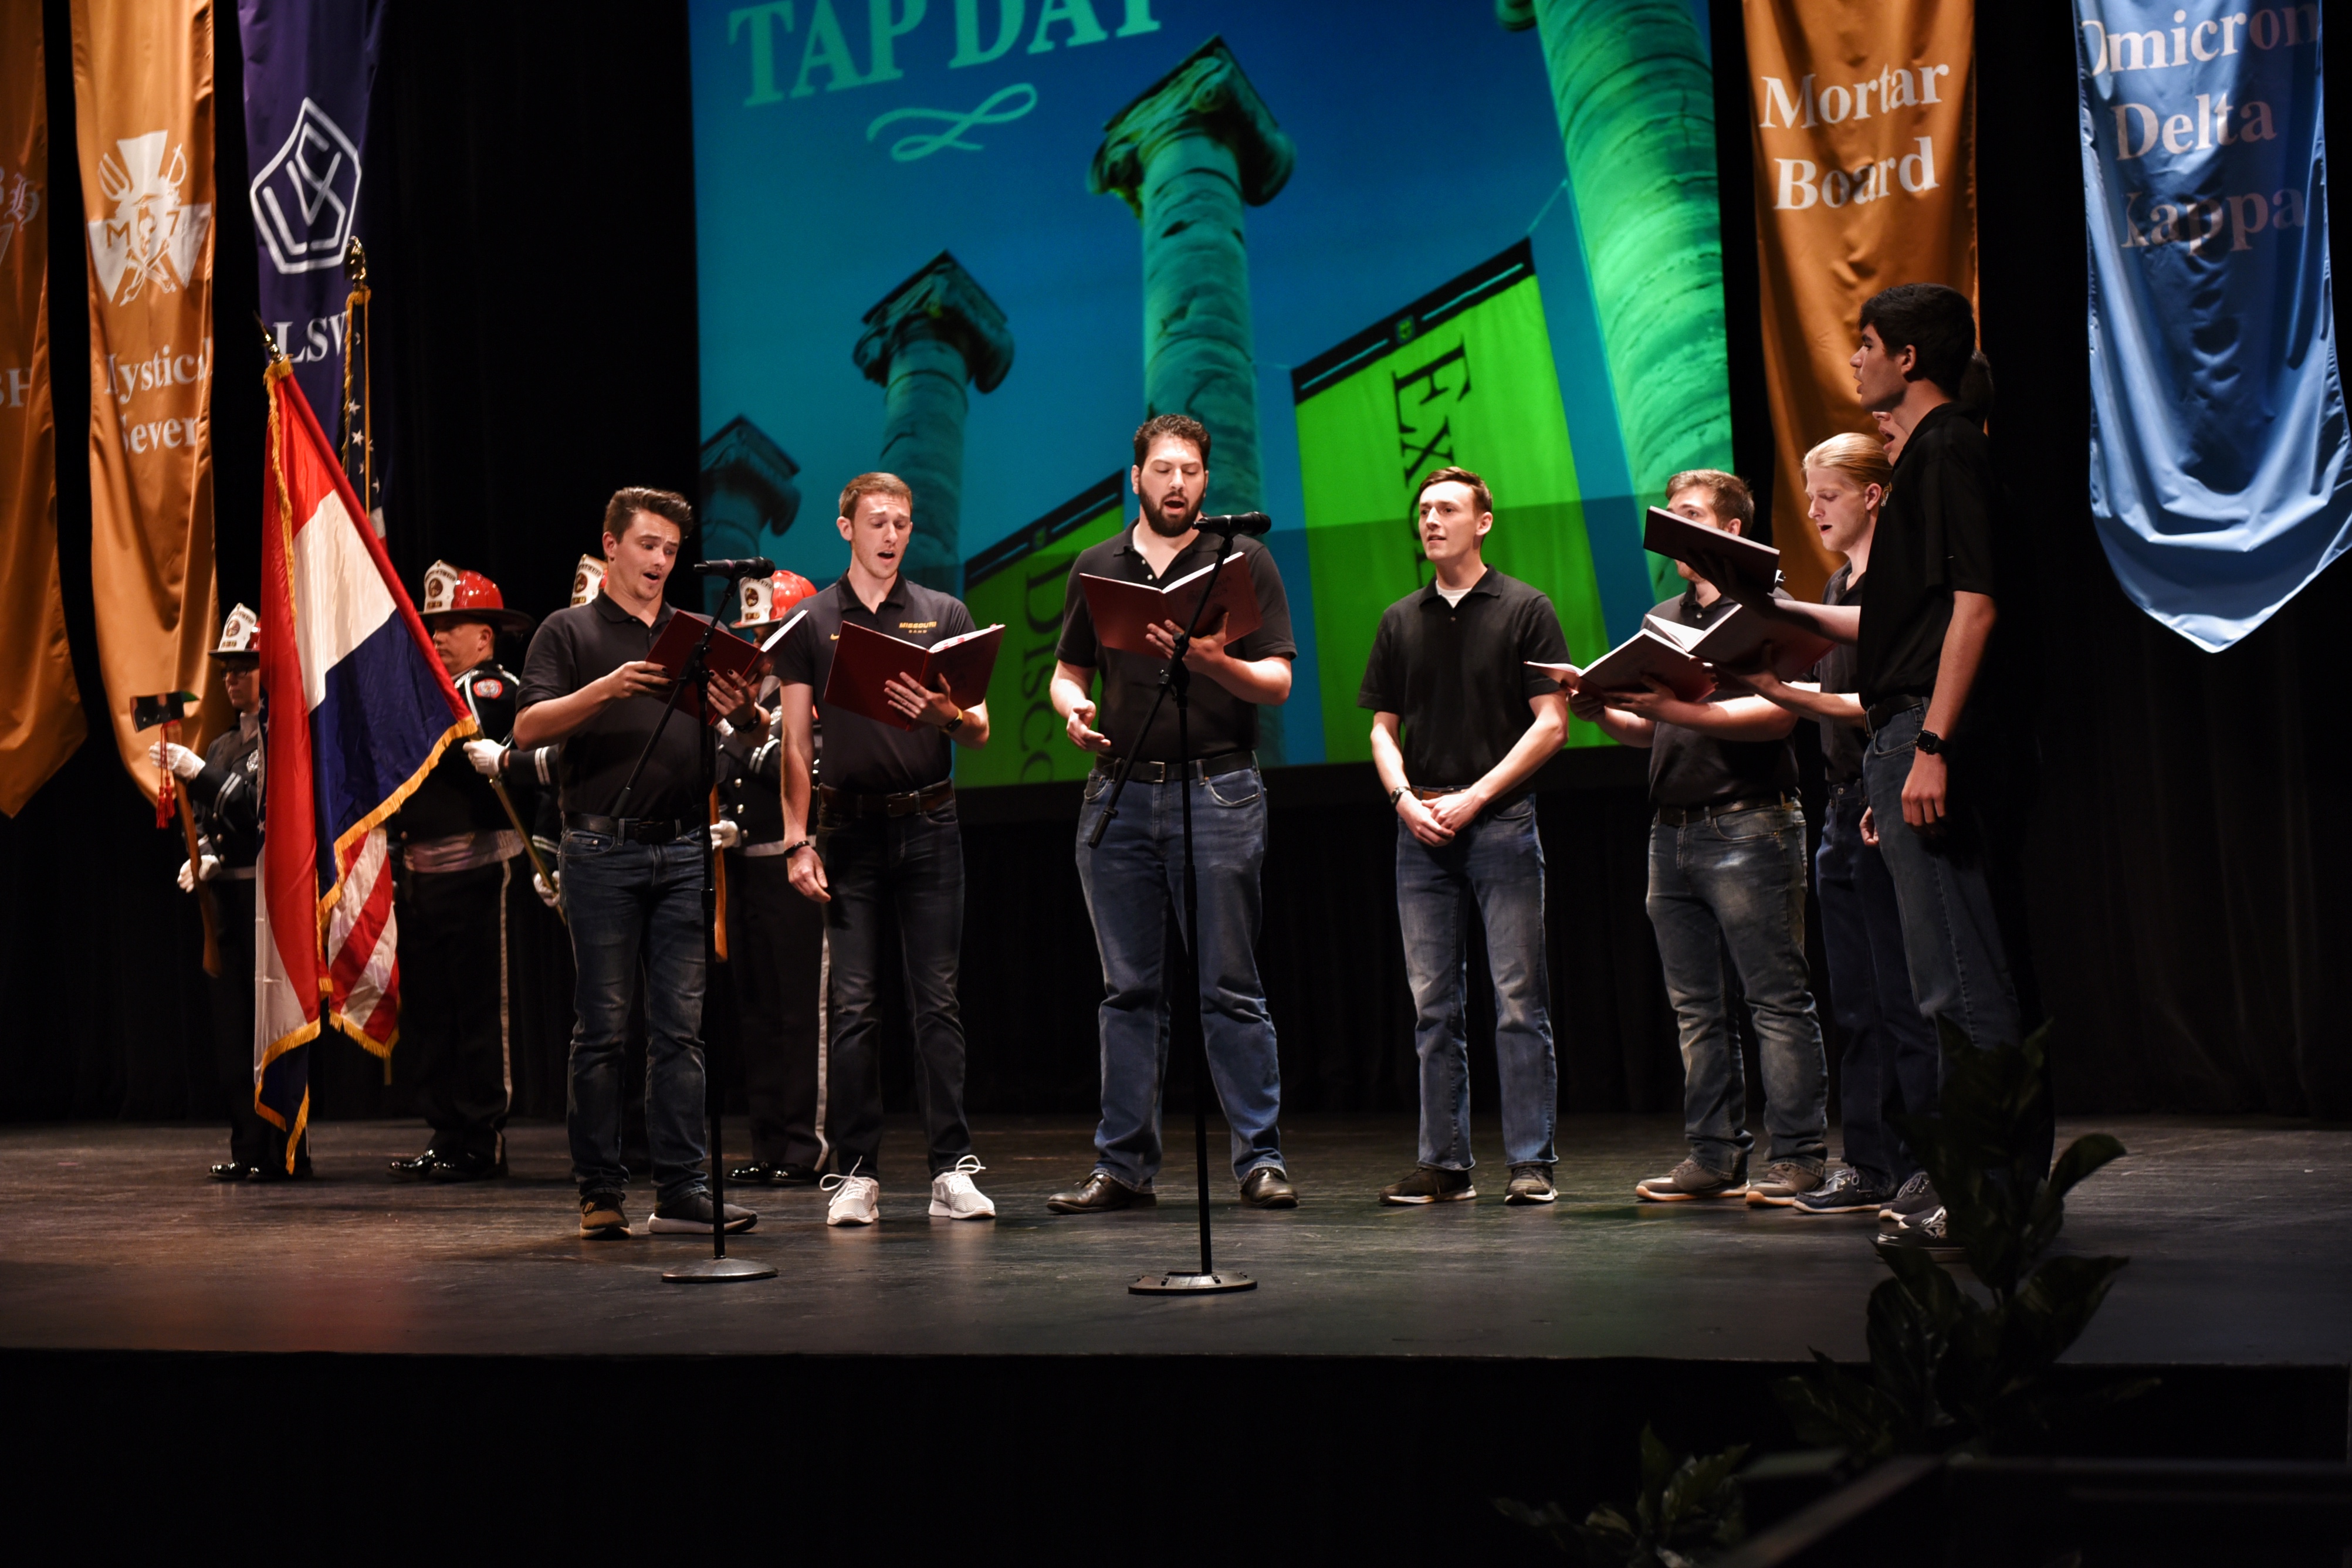 Members of Phi Mu Alpha Sinfonia perform the National Anthem to start Tap Day.